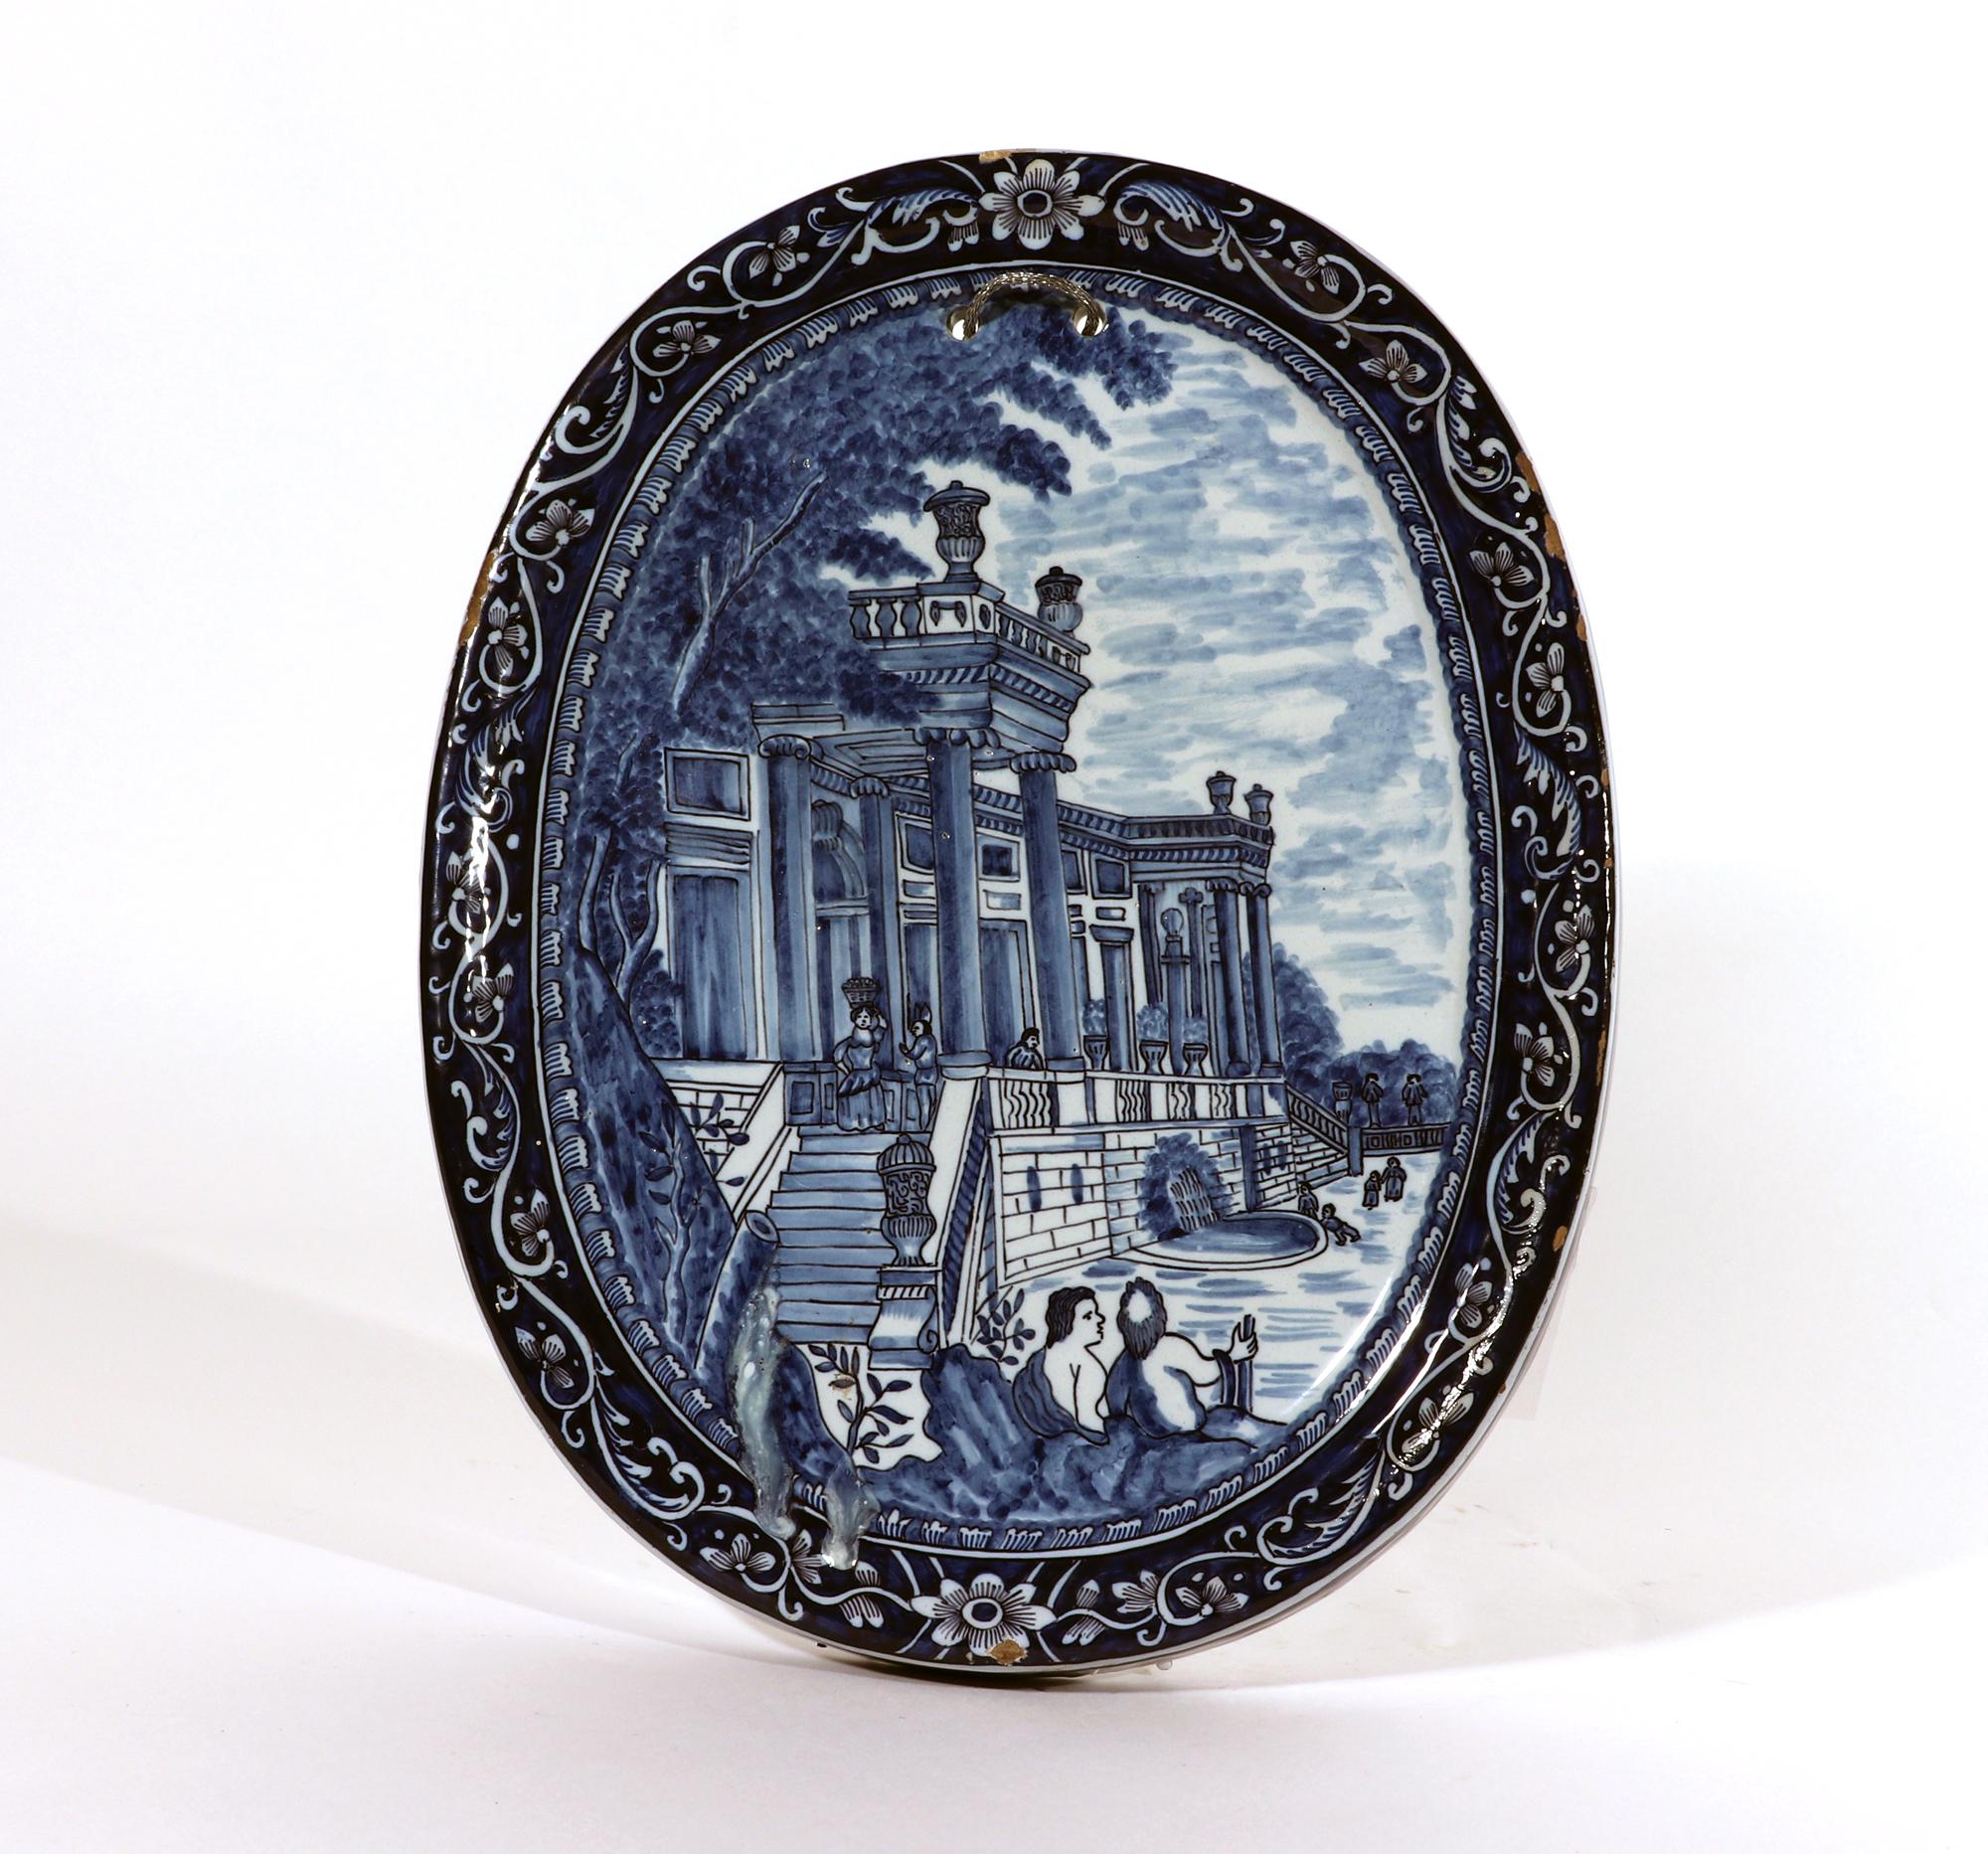 Dutch Delft Oval Blue & White Plaque,
Pieter Gerritsz Kam, (The Three Porcelain Ash-Barrels) factory), or his widow Maria van der Kloot,
Circa 1700-1710

The large Dutch Delft blue and white plaque in an upright format is painted with the facade of